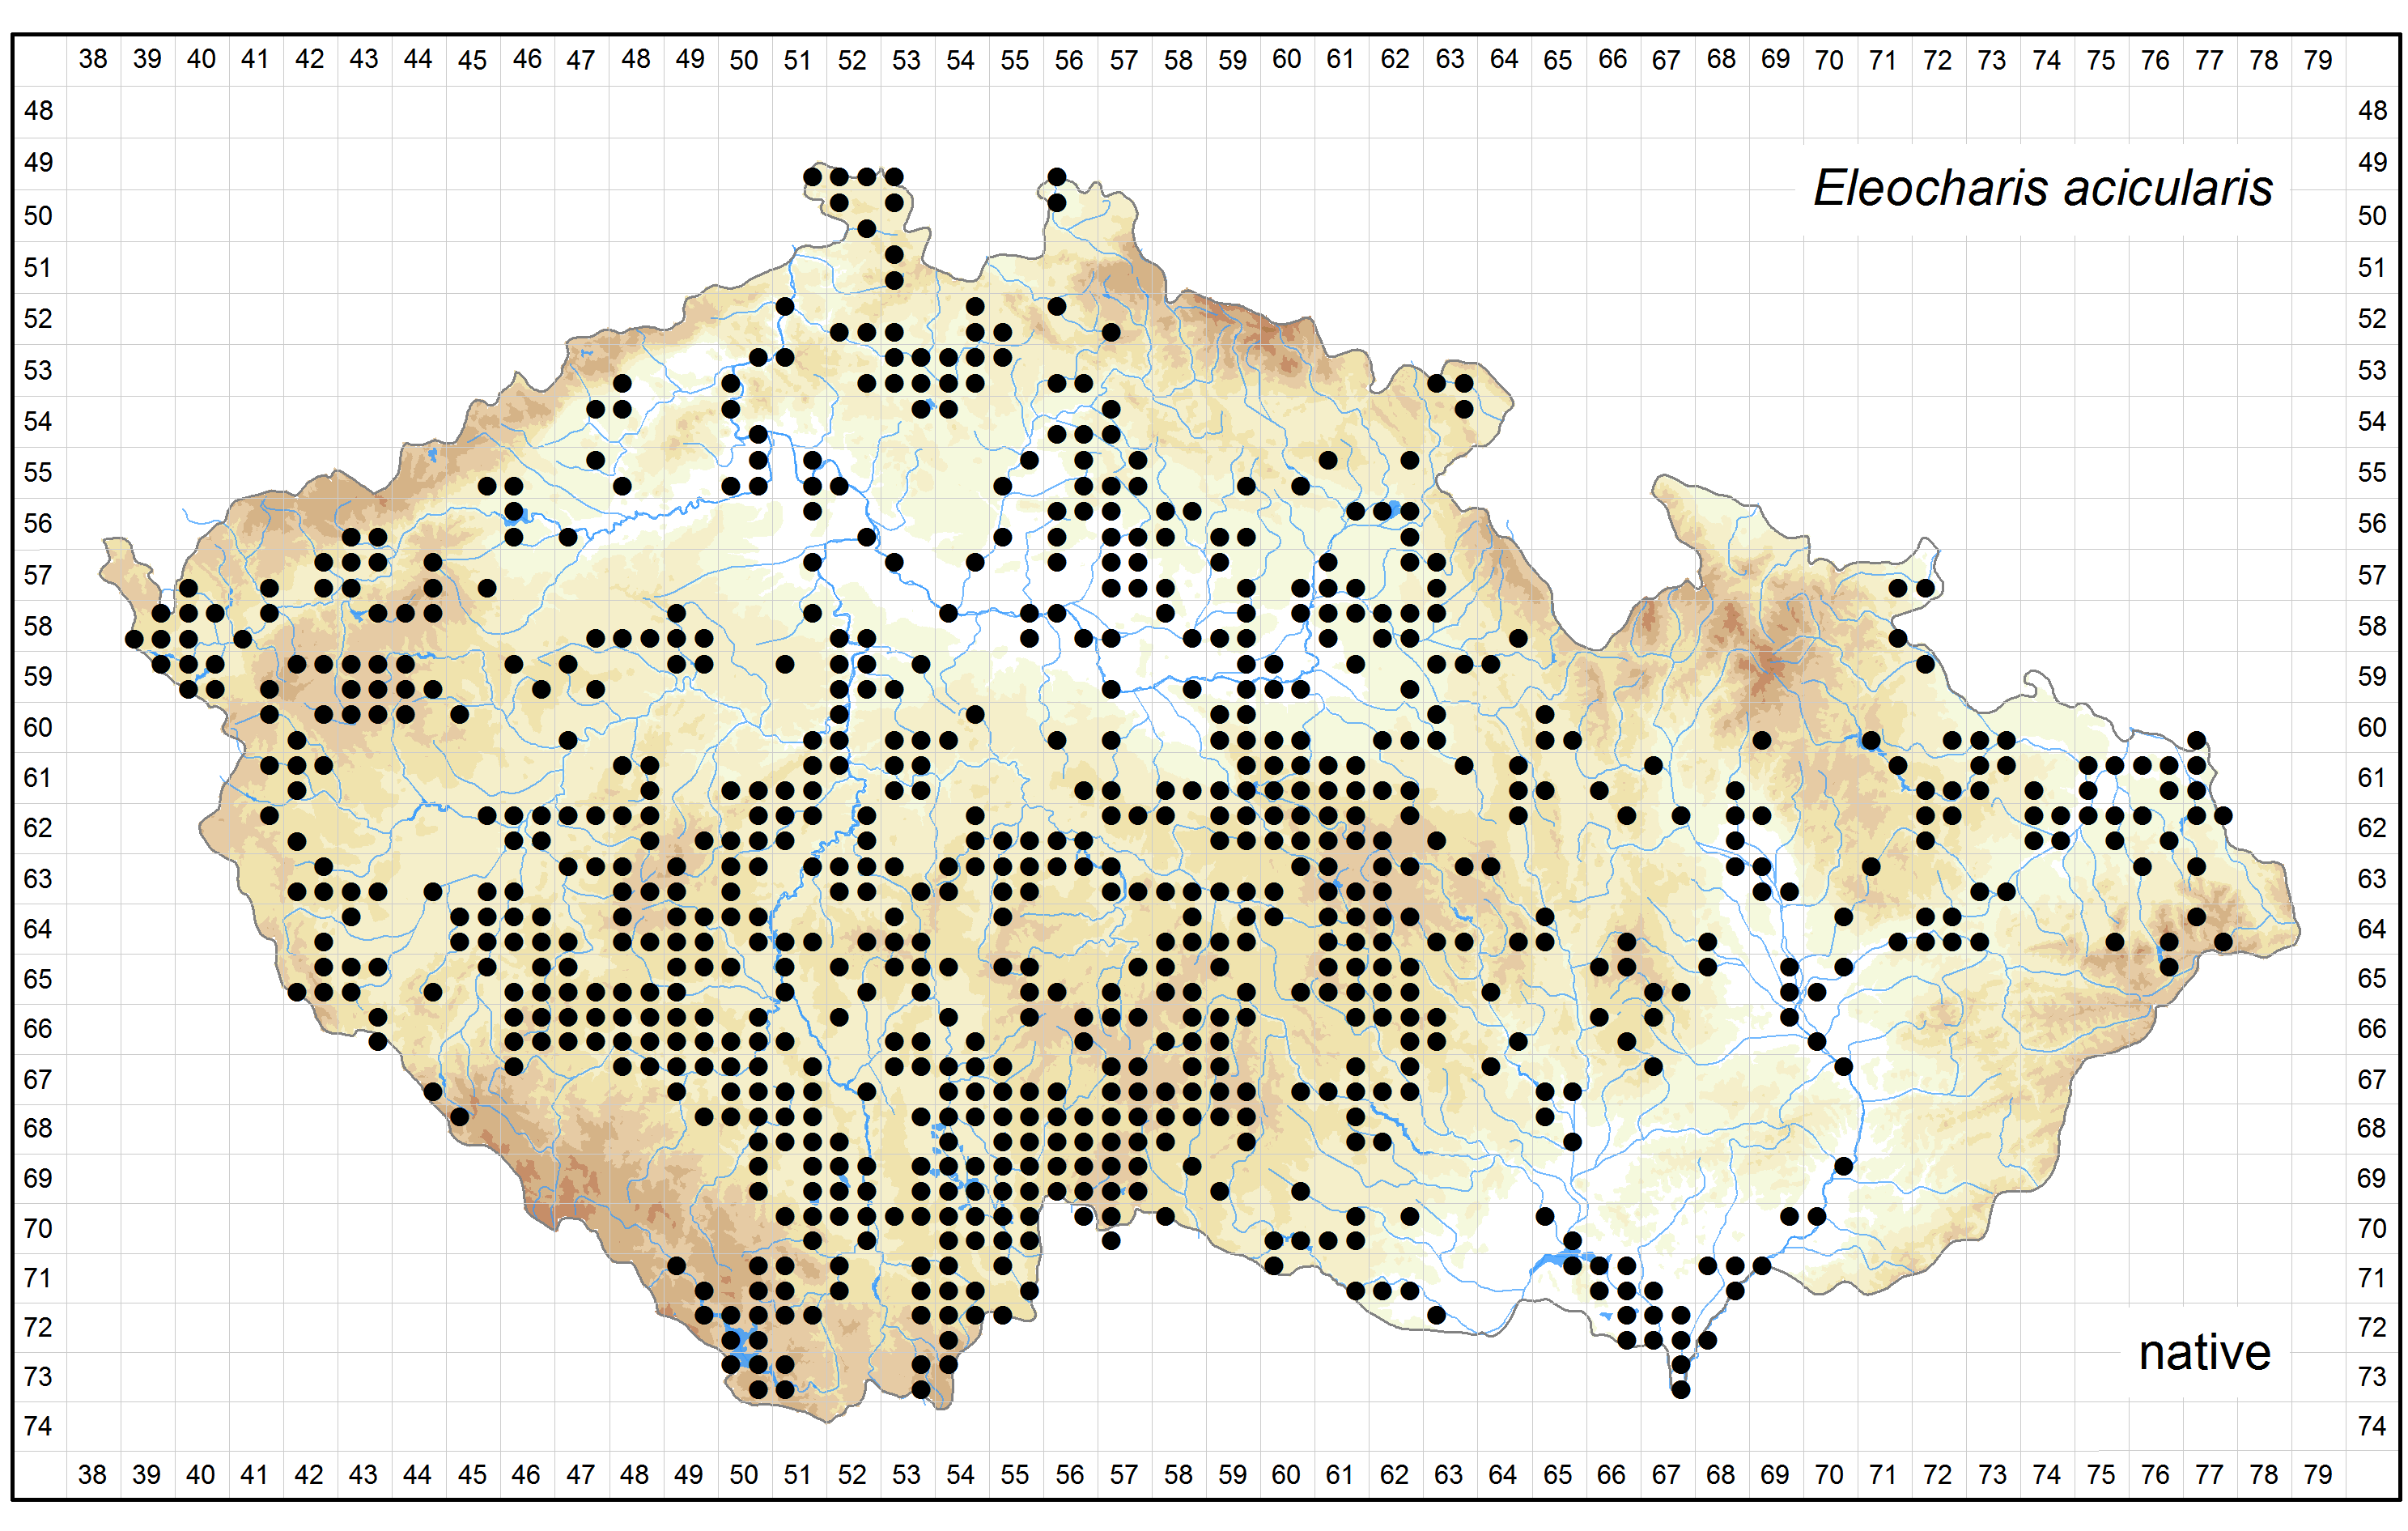 Distribution of Eleocharis acicularis in the Czech Republic Author of the map: Petr Bureš Map produced on: 18-11-2015 Database records used for producing the distribution map of Eleocharis acicularis